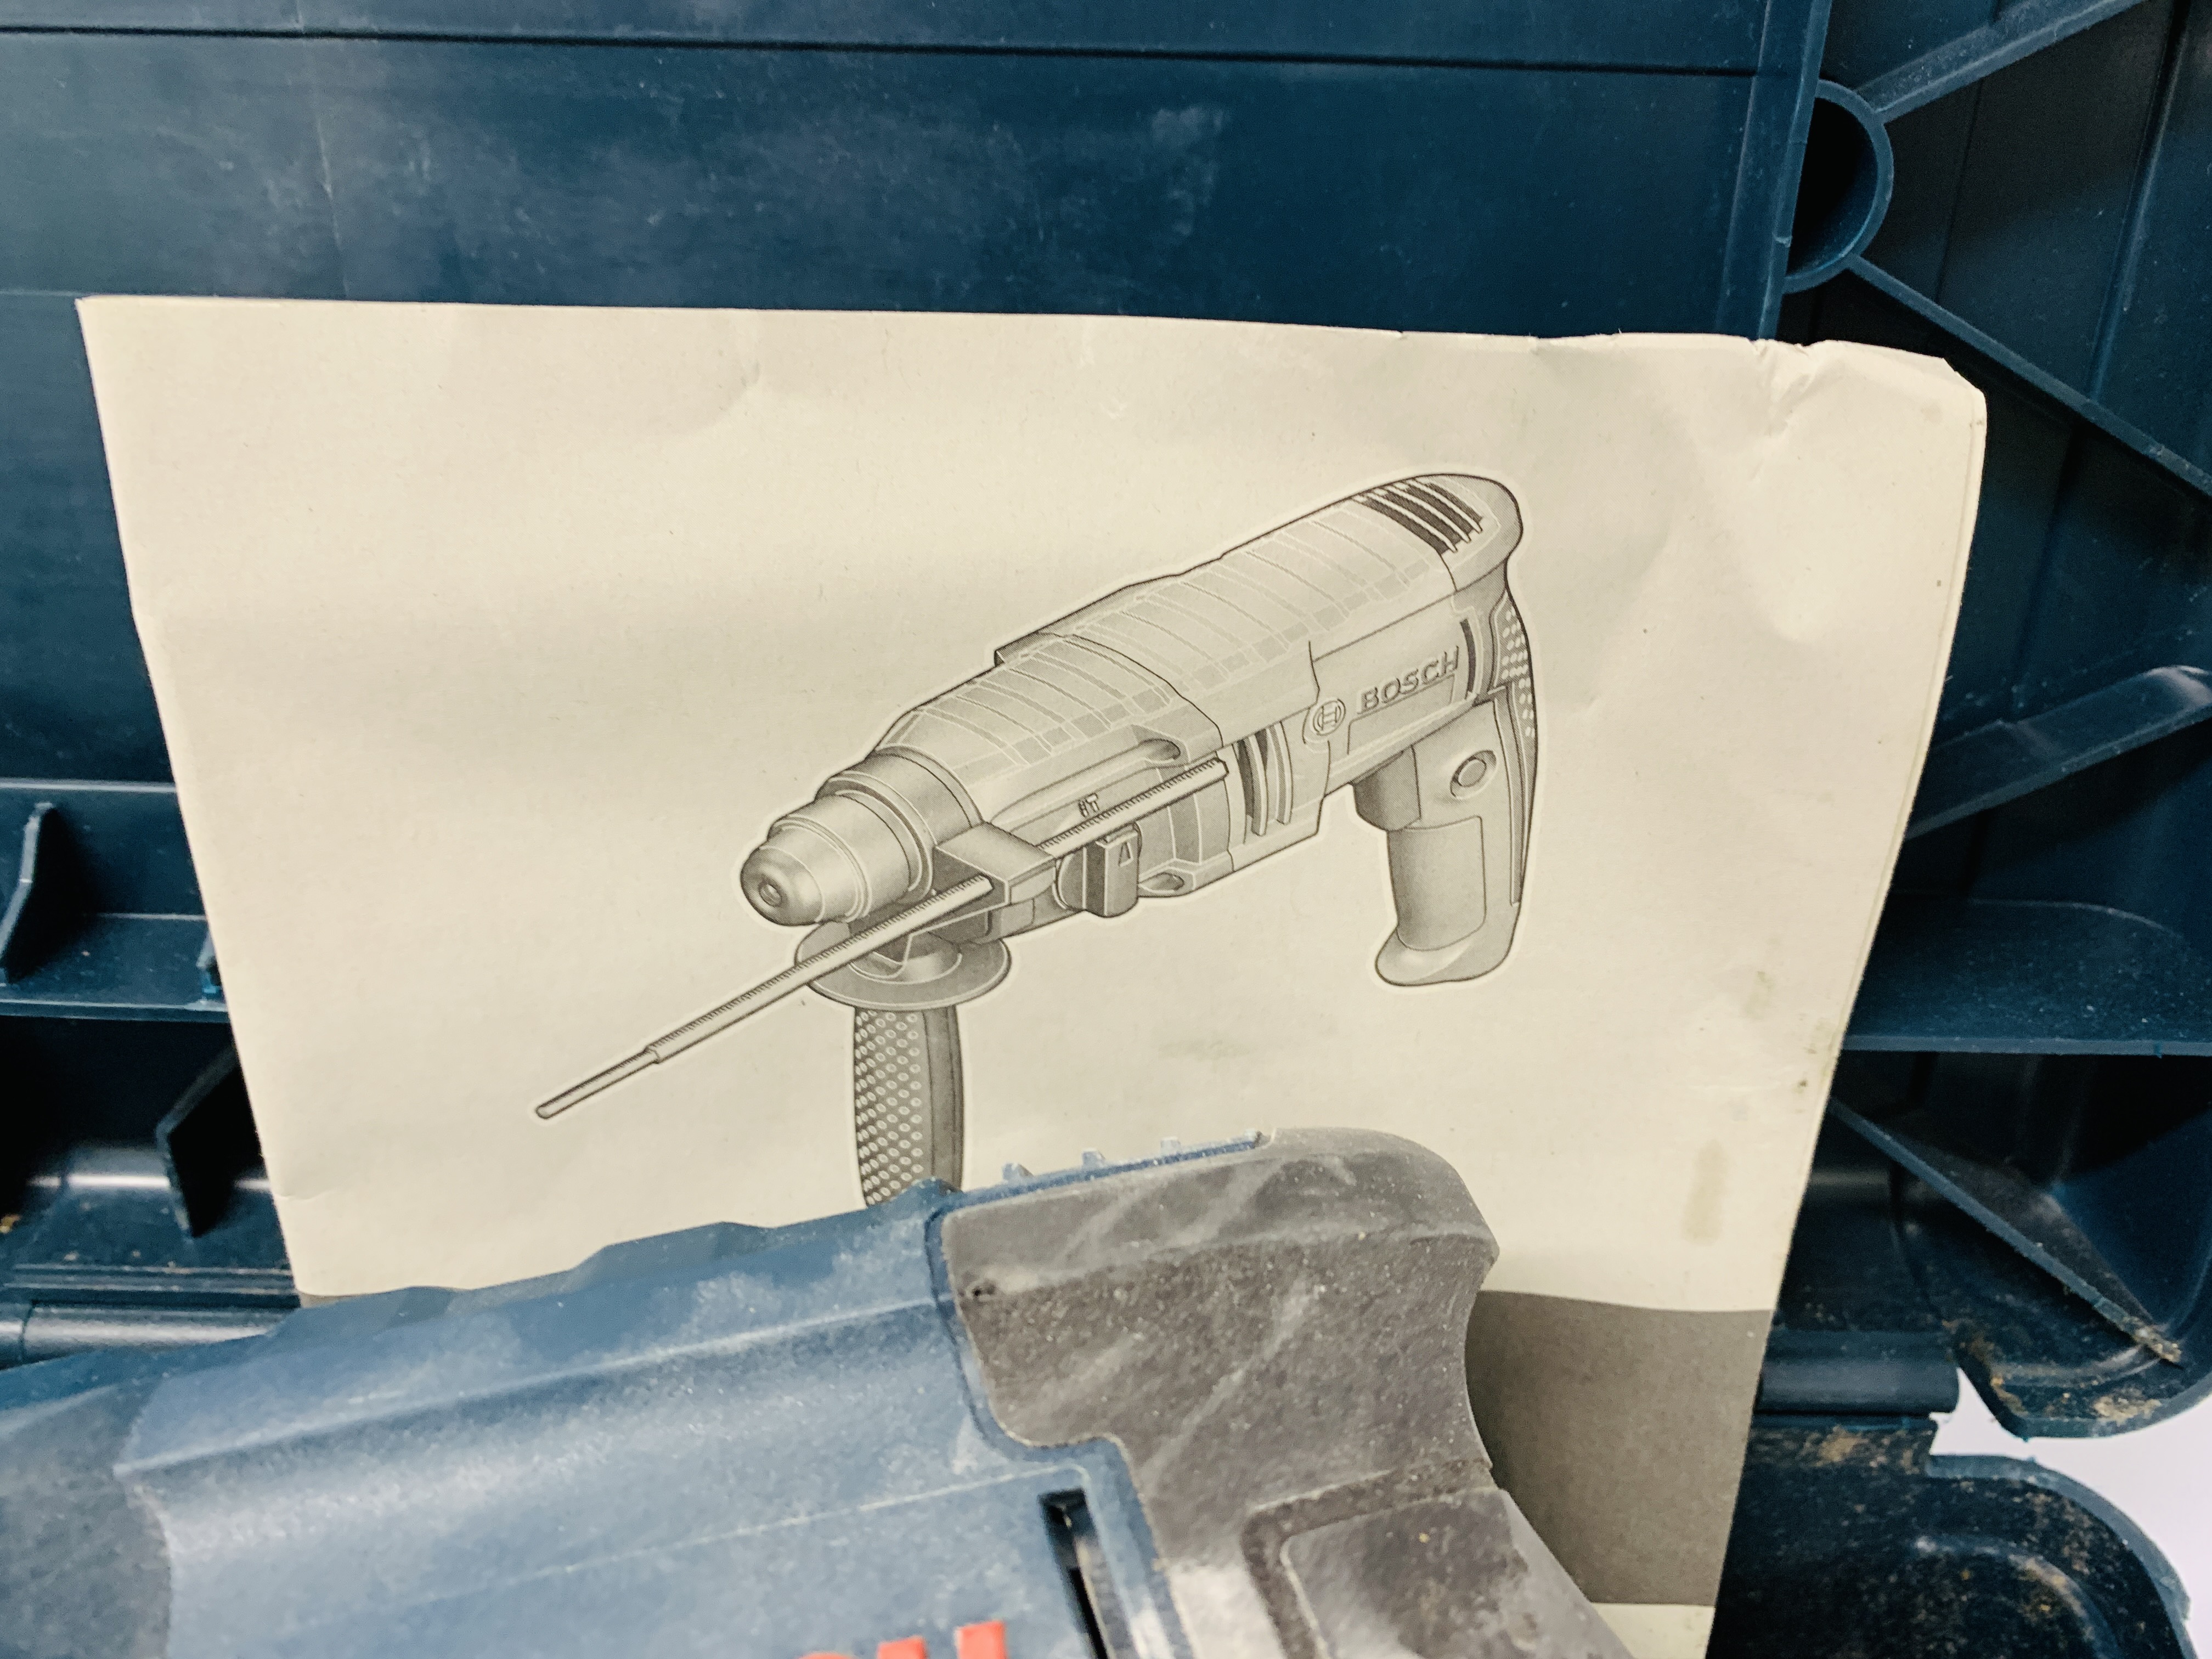 BOSCH PROFESSIONAL GBH 2000 110V HAMMER DRILL - SOLD AS SEEN - Image 4 of 6